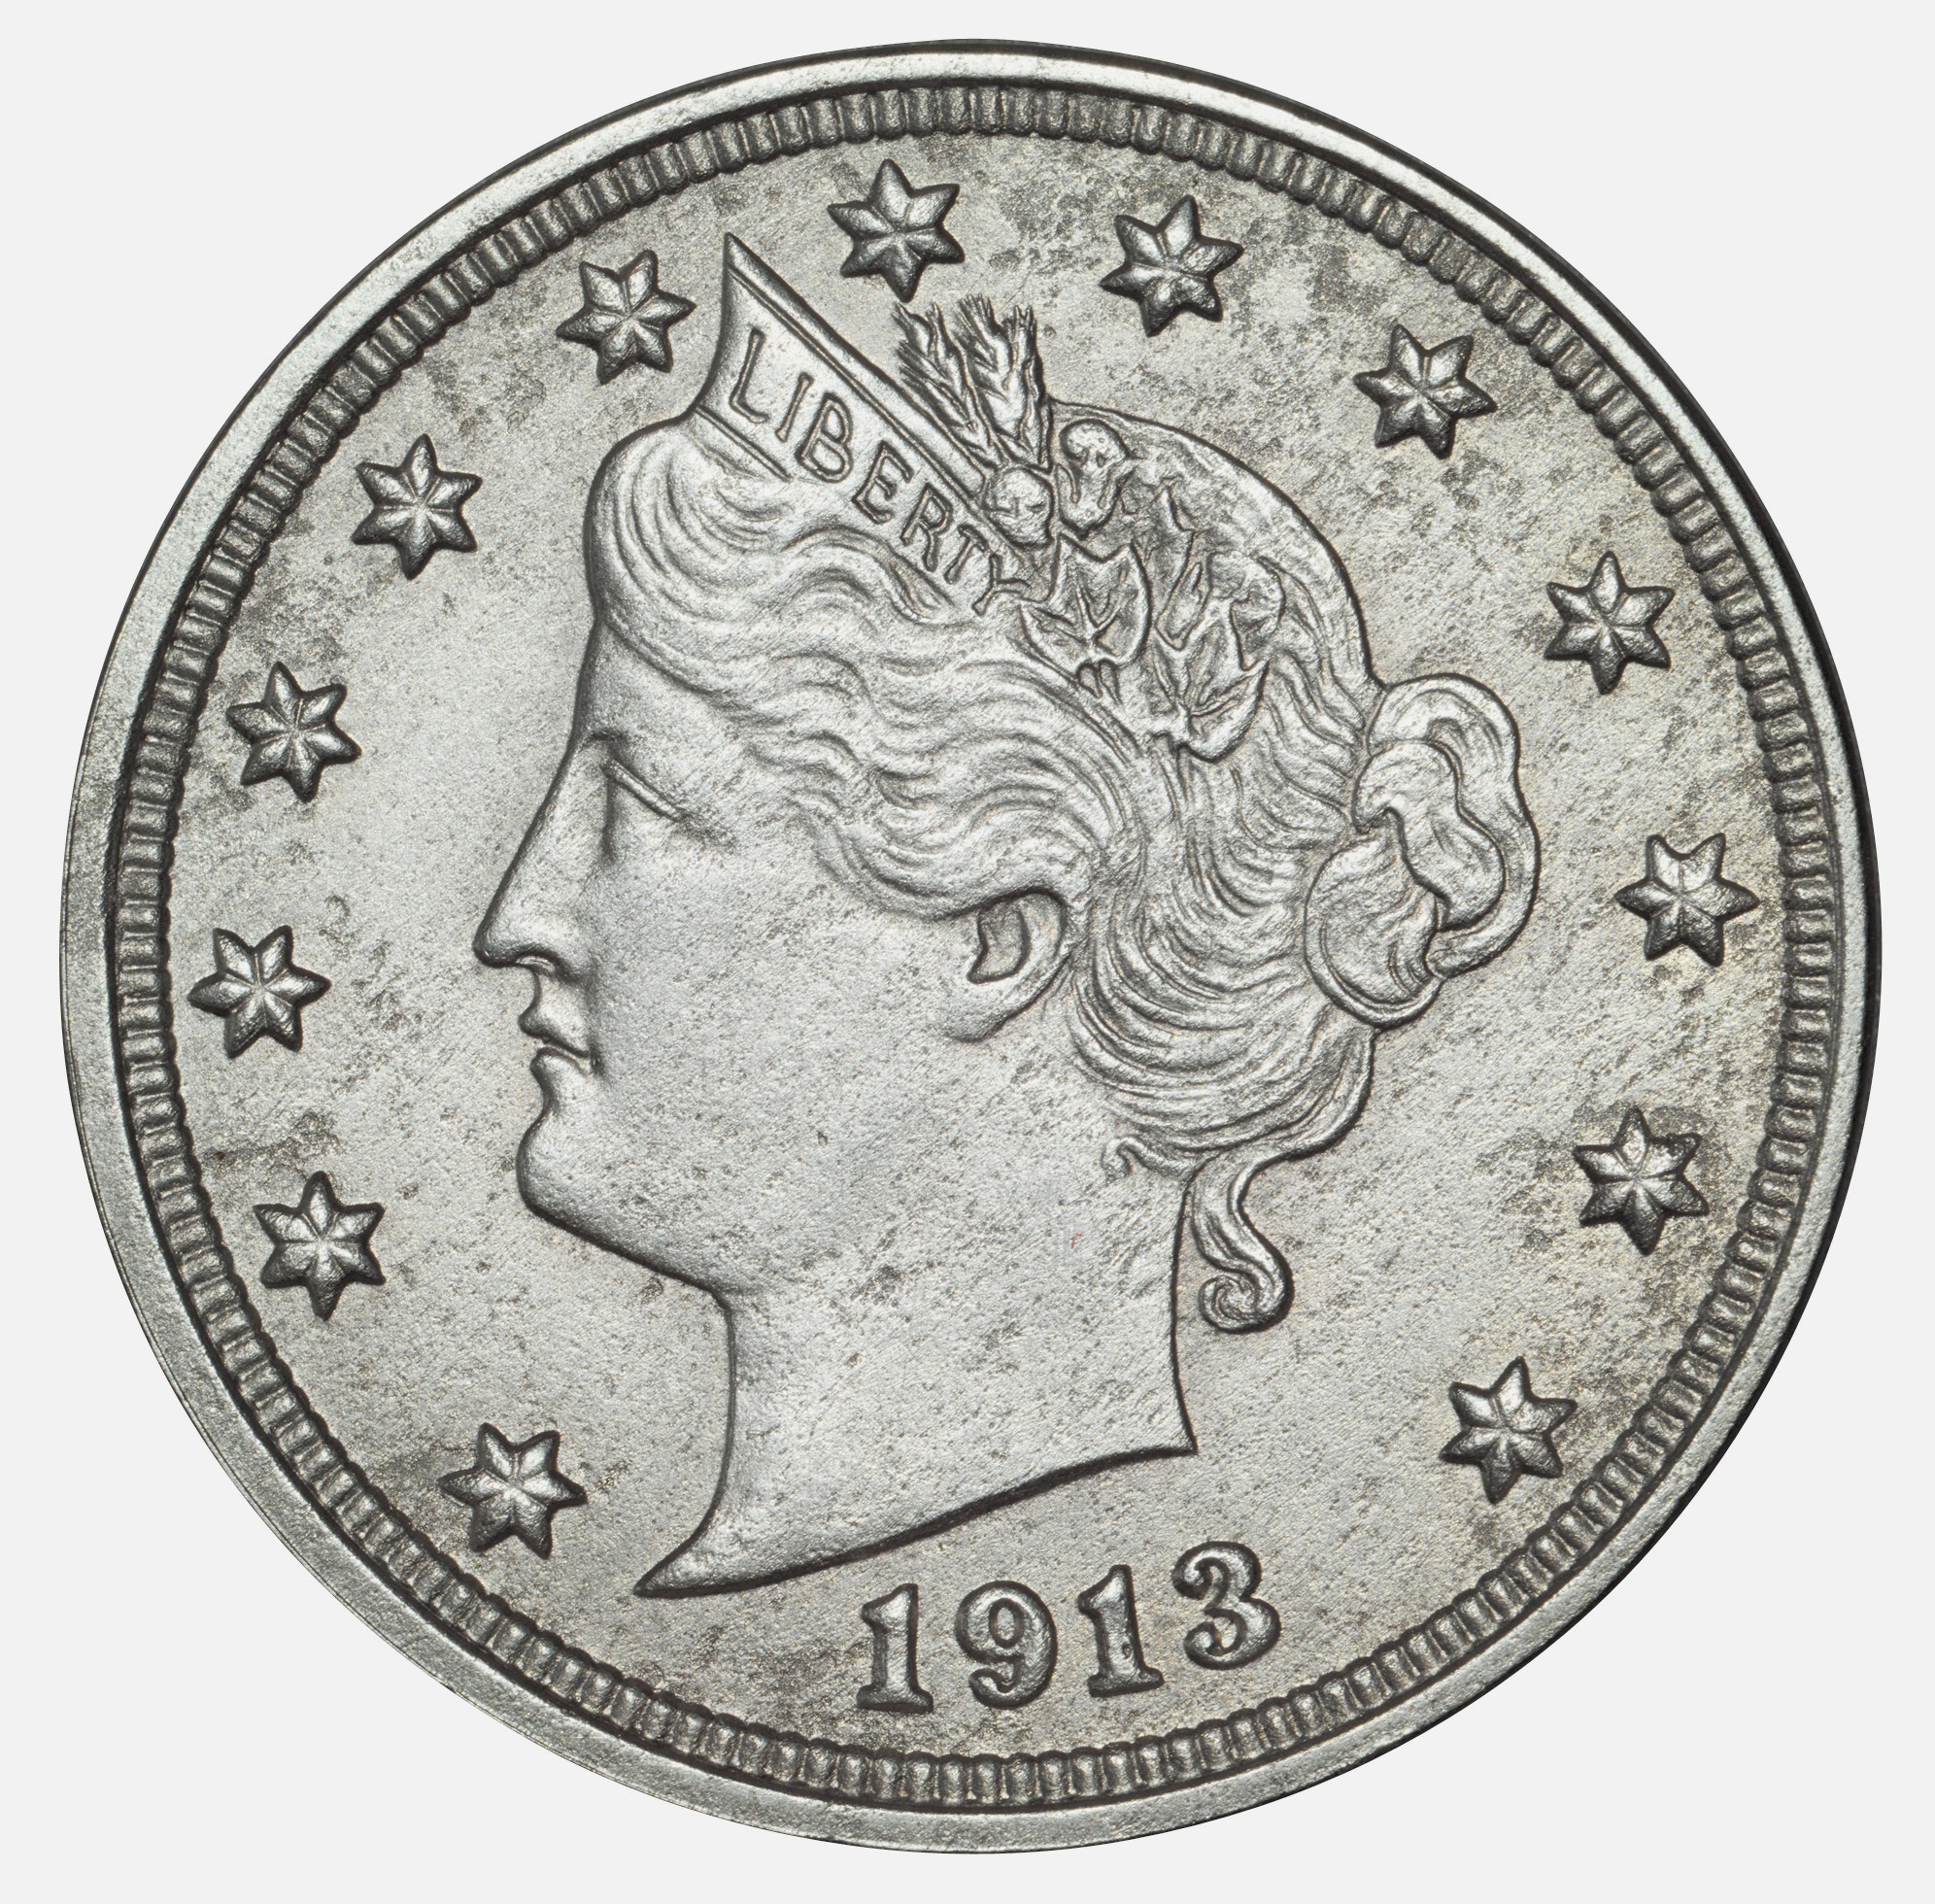 One of the world's most famous coins, a 1913 Liberty Head nickel insured for $3 million, is one of the attractions at the family-friendly National Money Show in Dallas, March 3 -5, 2016.